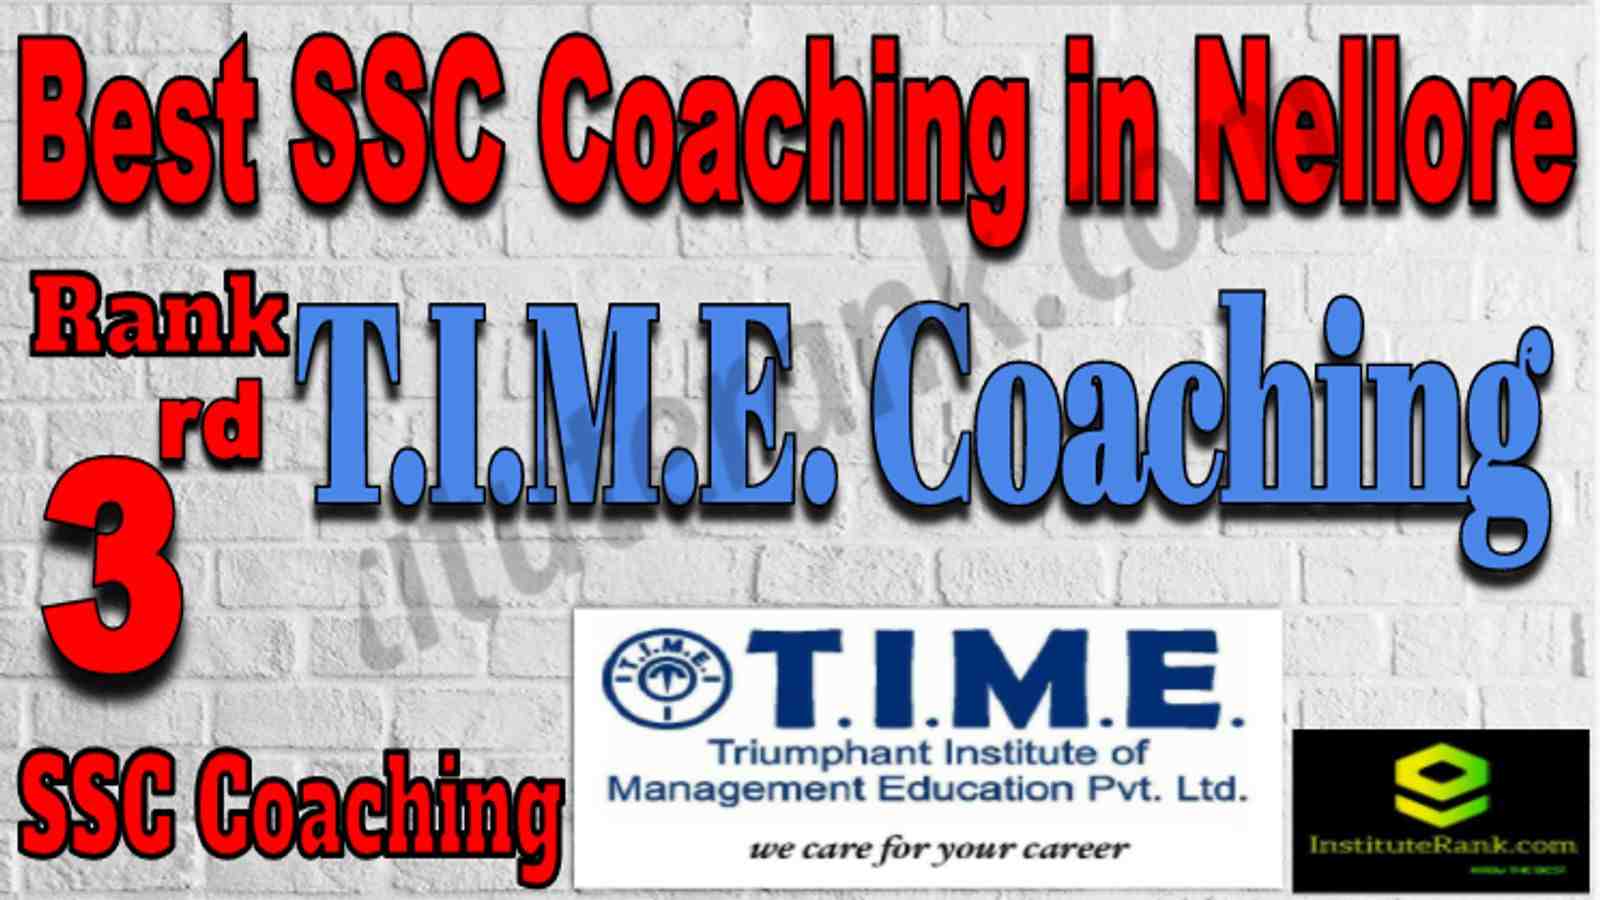 Rank 3 Best SSC Coaching in Nellore